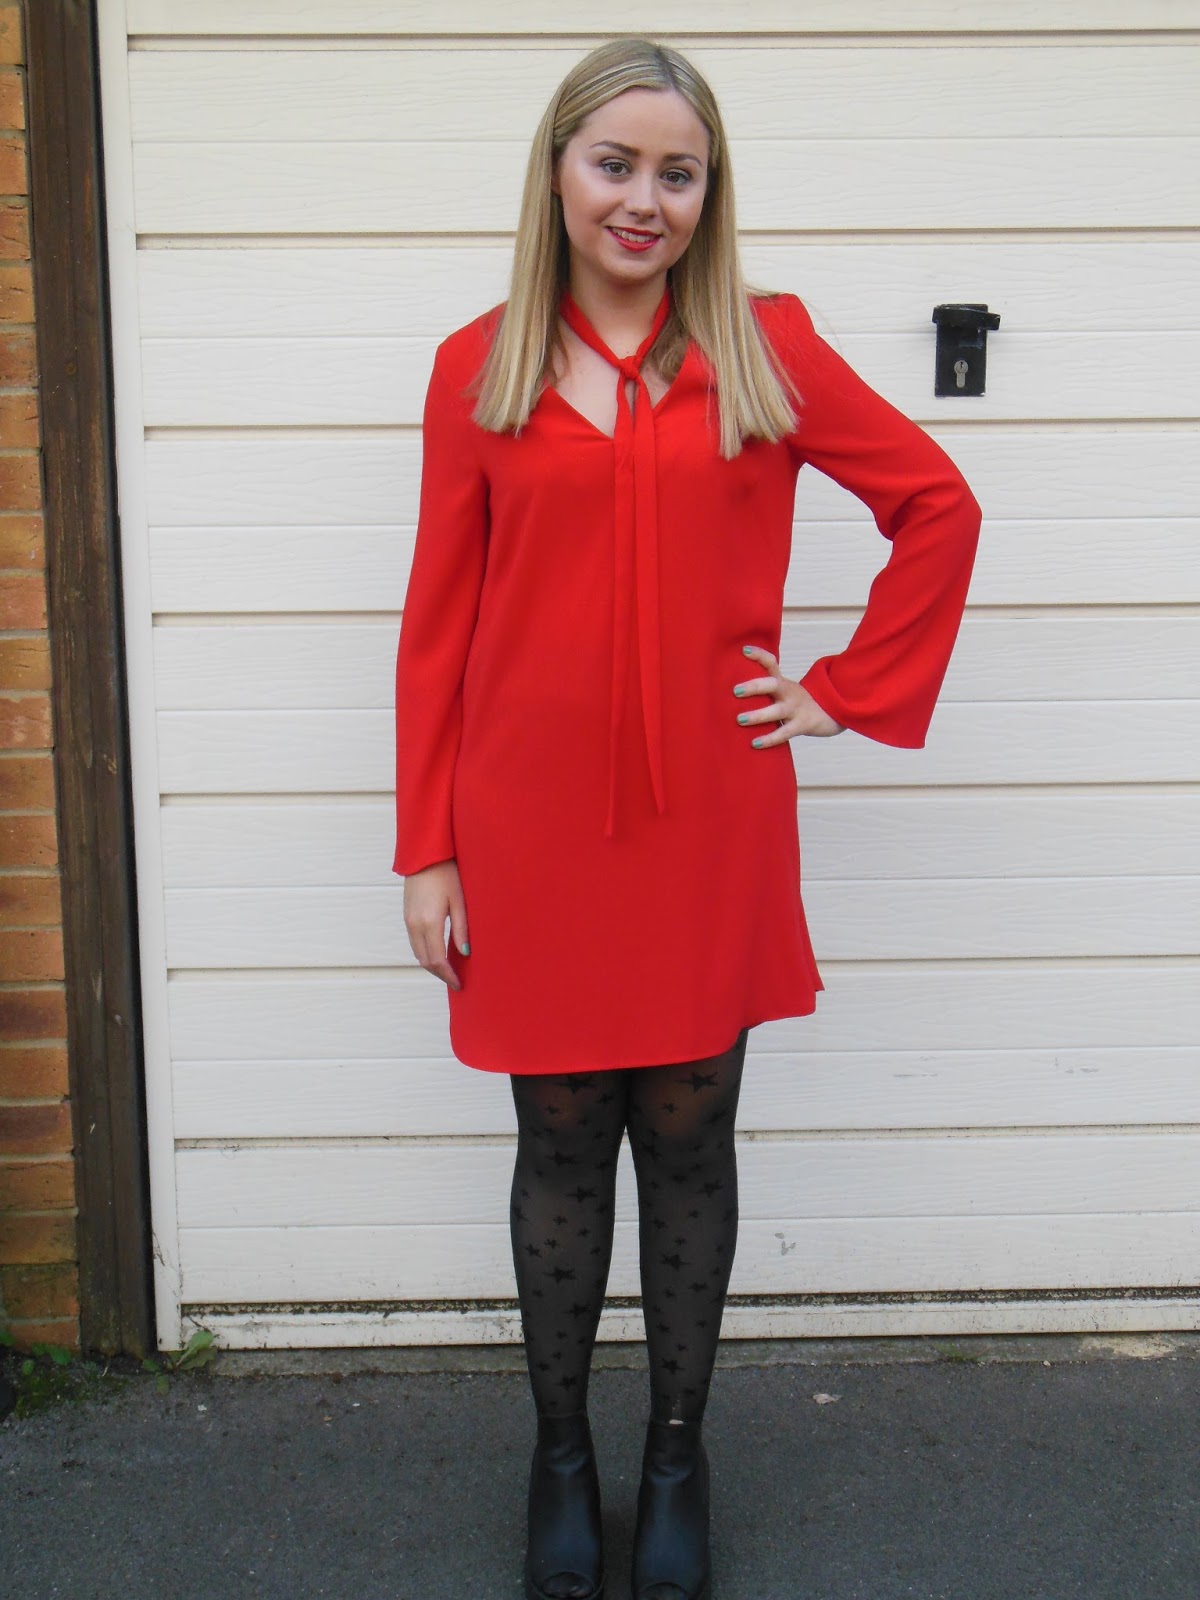 fashionista-on-a-budget.blogspot.co.uk - Fashionmylegs : The tights and ...